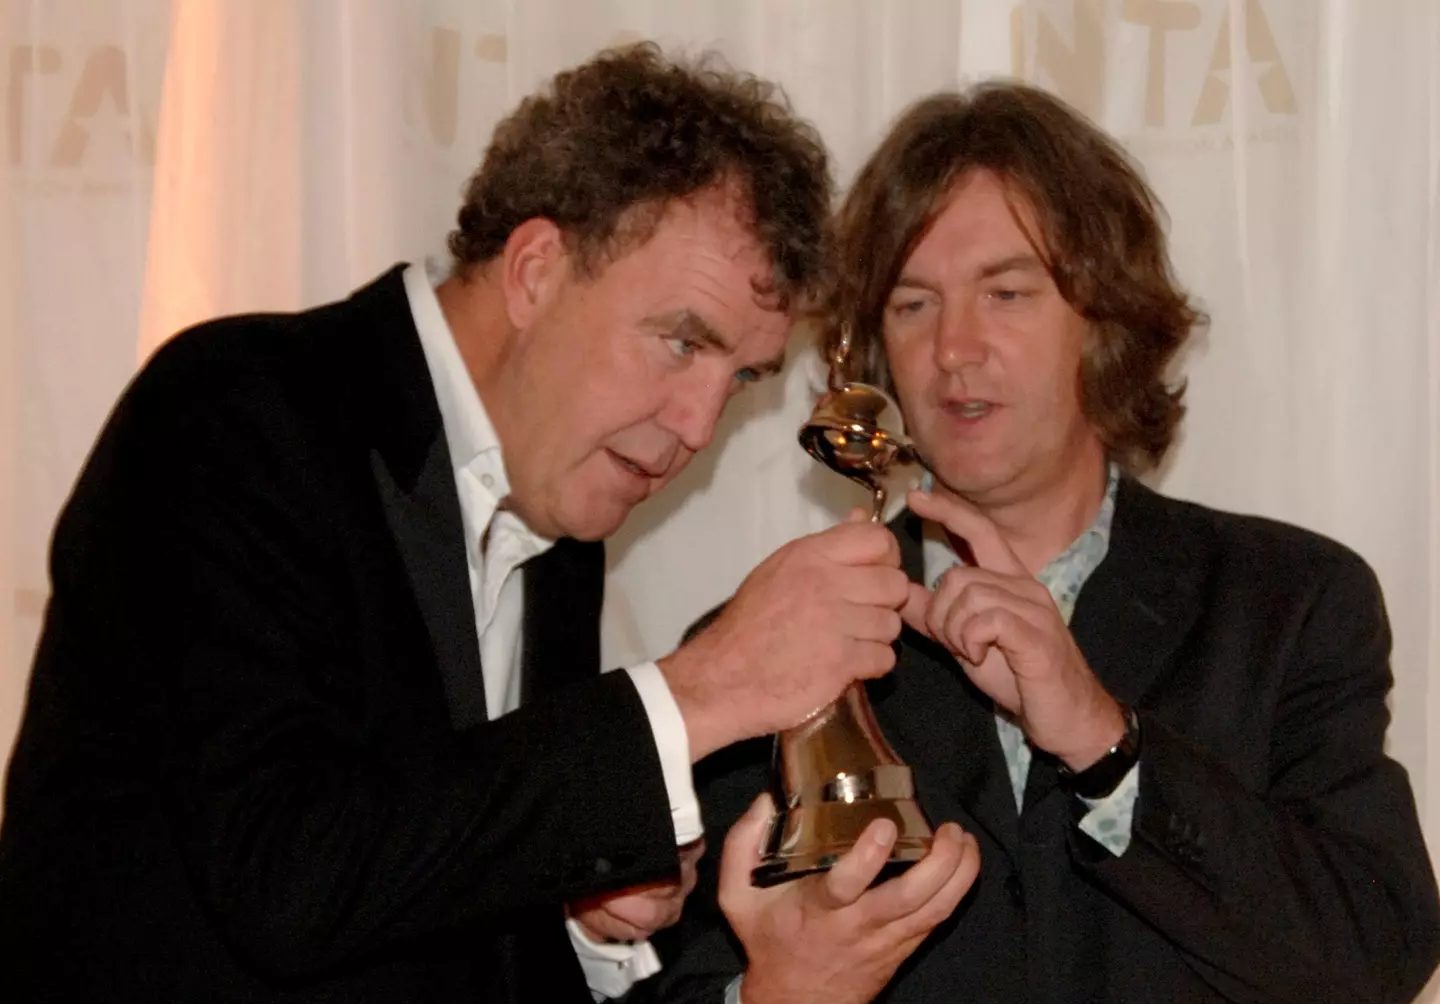 Jeremy Clarkson and James May in 2006.